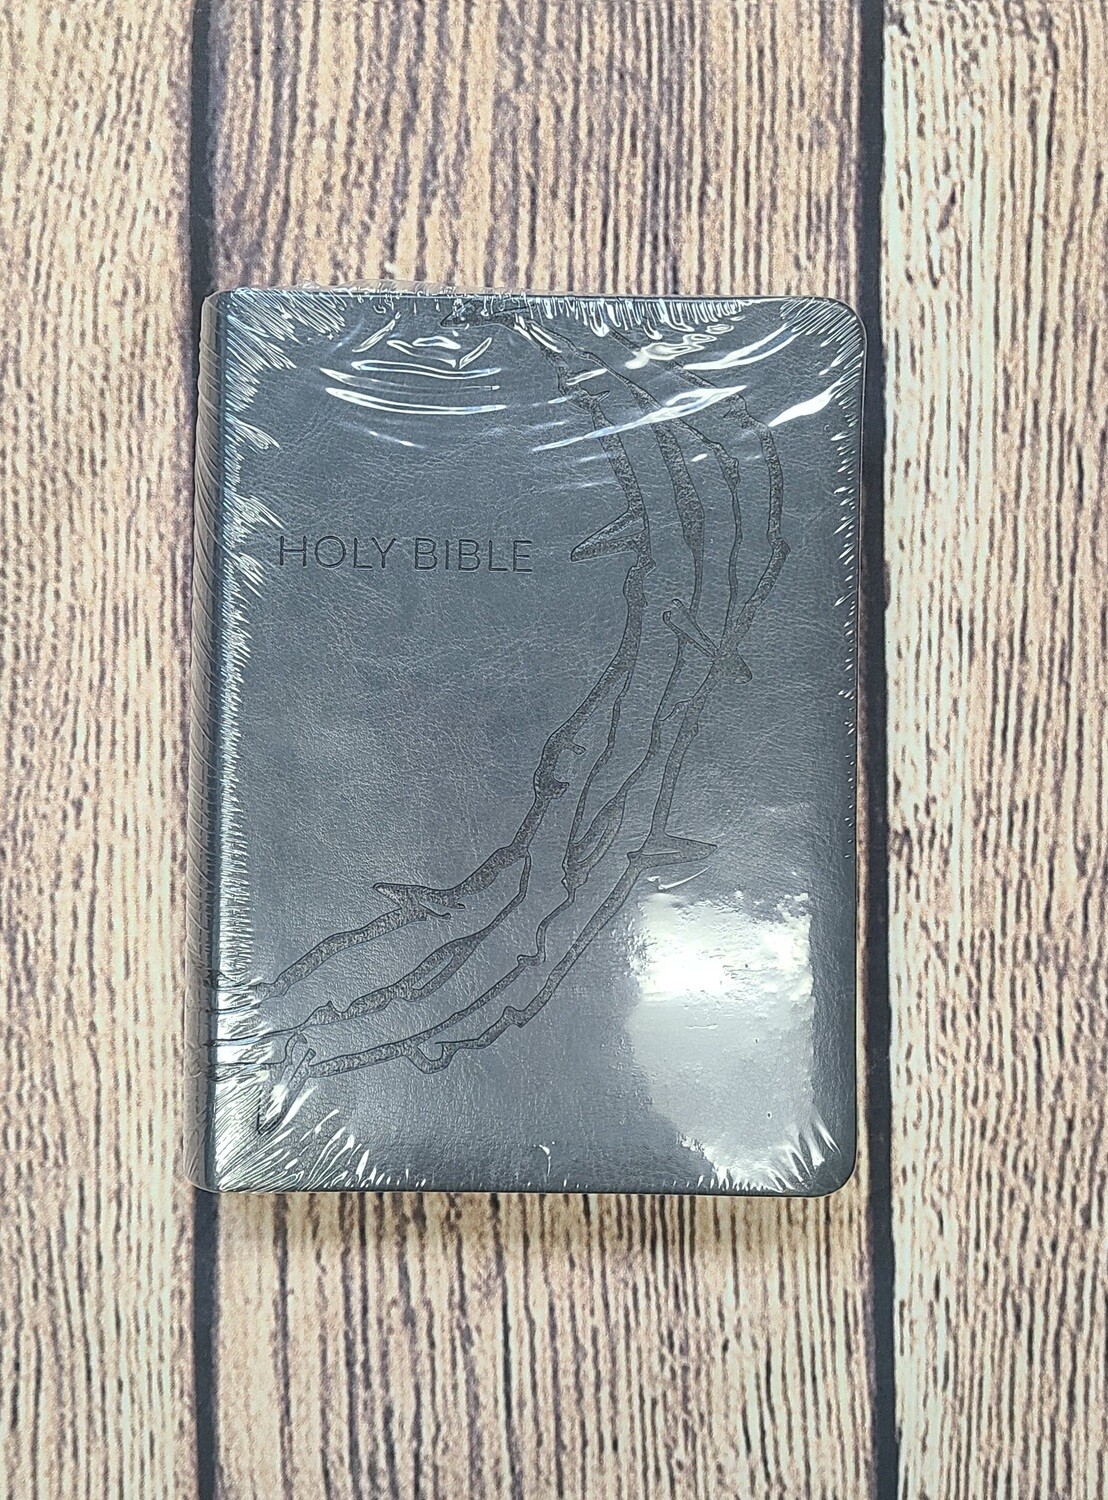 KJV Sword Study Bible: Large Print Thumb-Indexed - Designer Charcoal Leather with Crown of Thorns